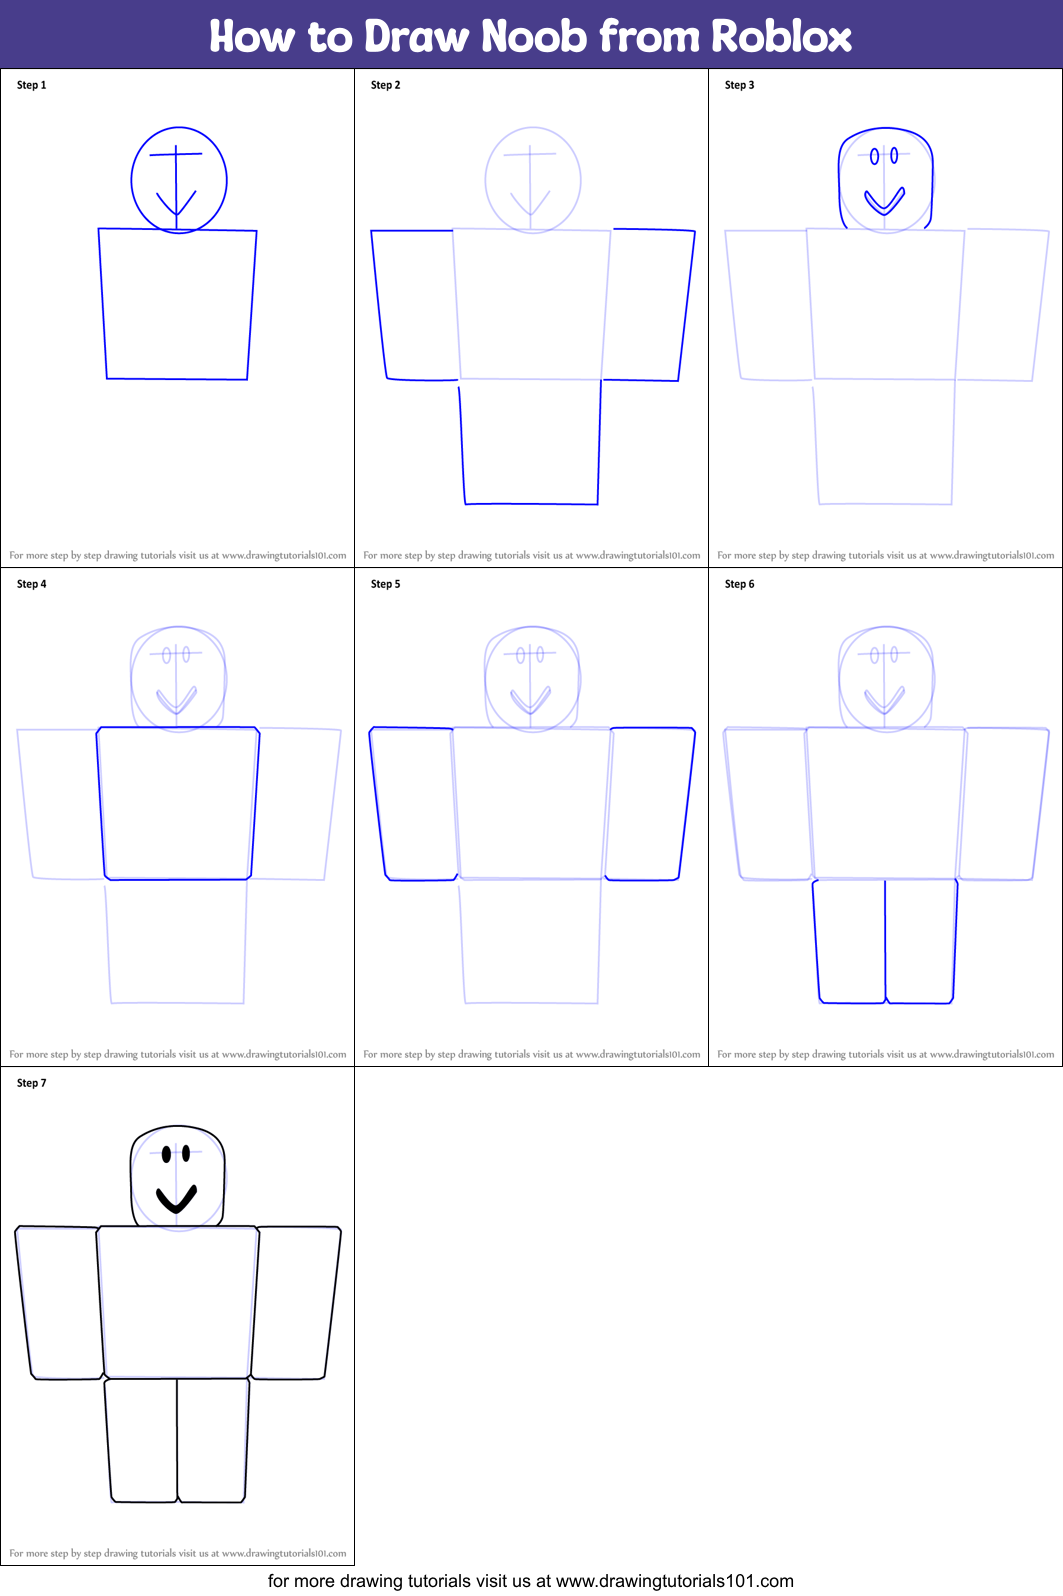 How to Draw Noob from Roblox printable step by step drawing sheet